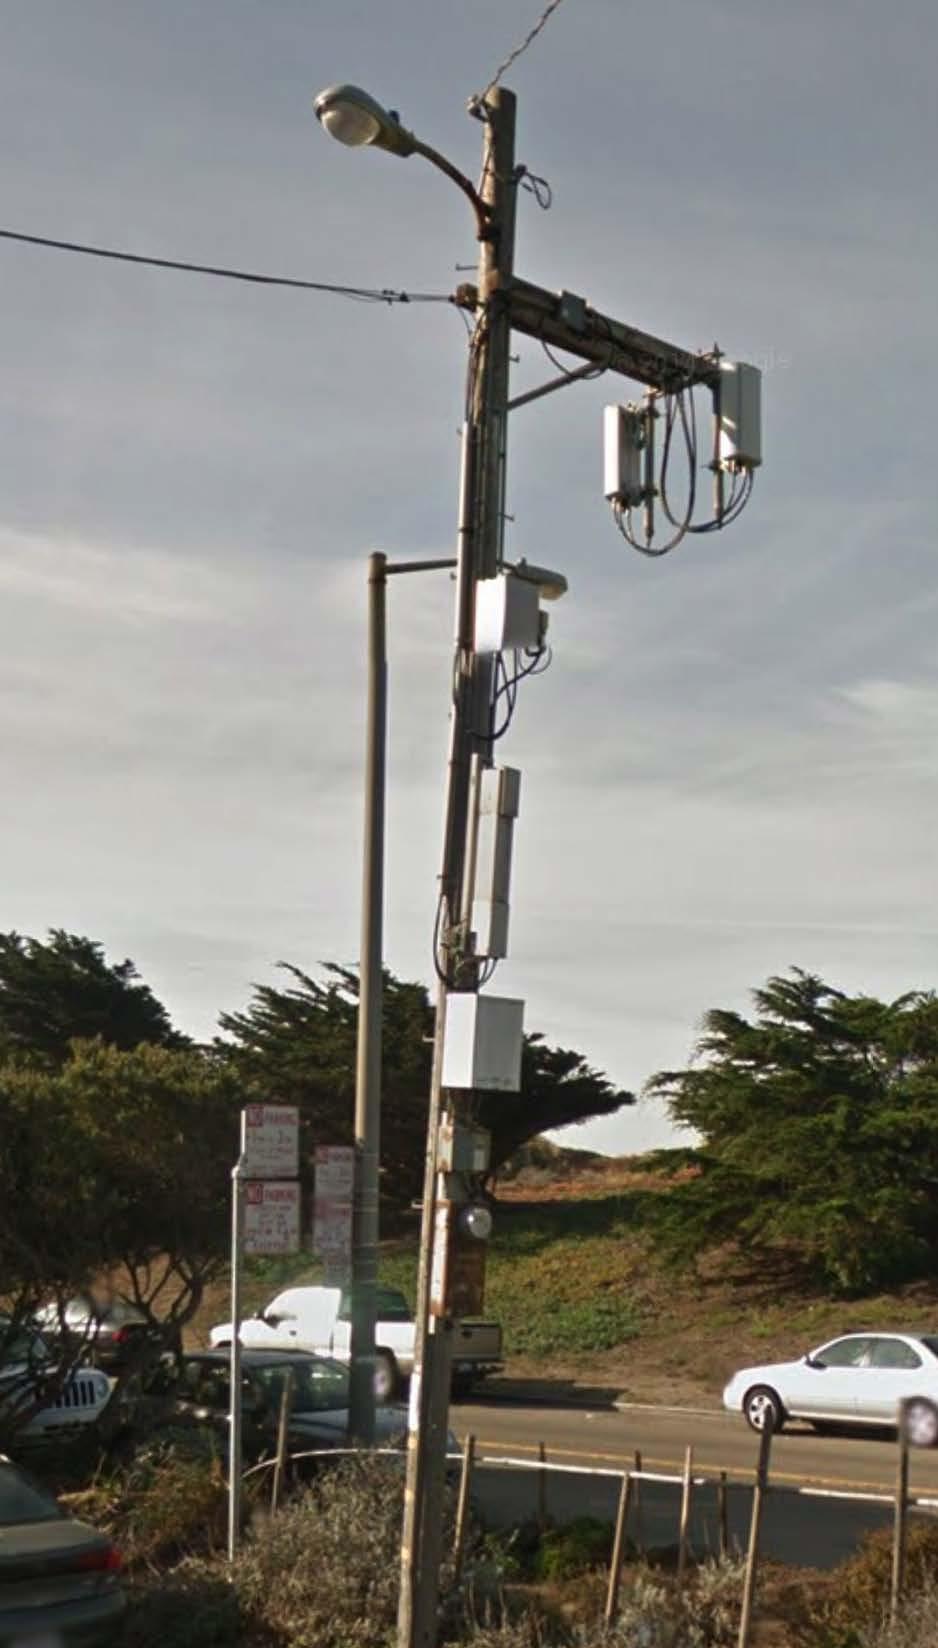 Example Personal Wireless Services Facility Two panel antennas and equipment attached to an existing wooden utility pole (not owned by City) Disfavored Design (would not be recommended for approval